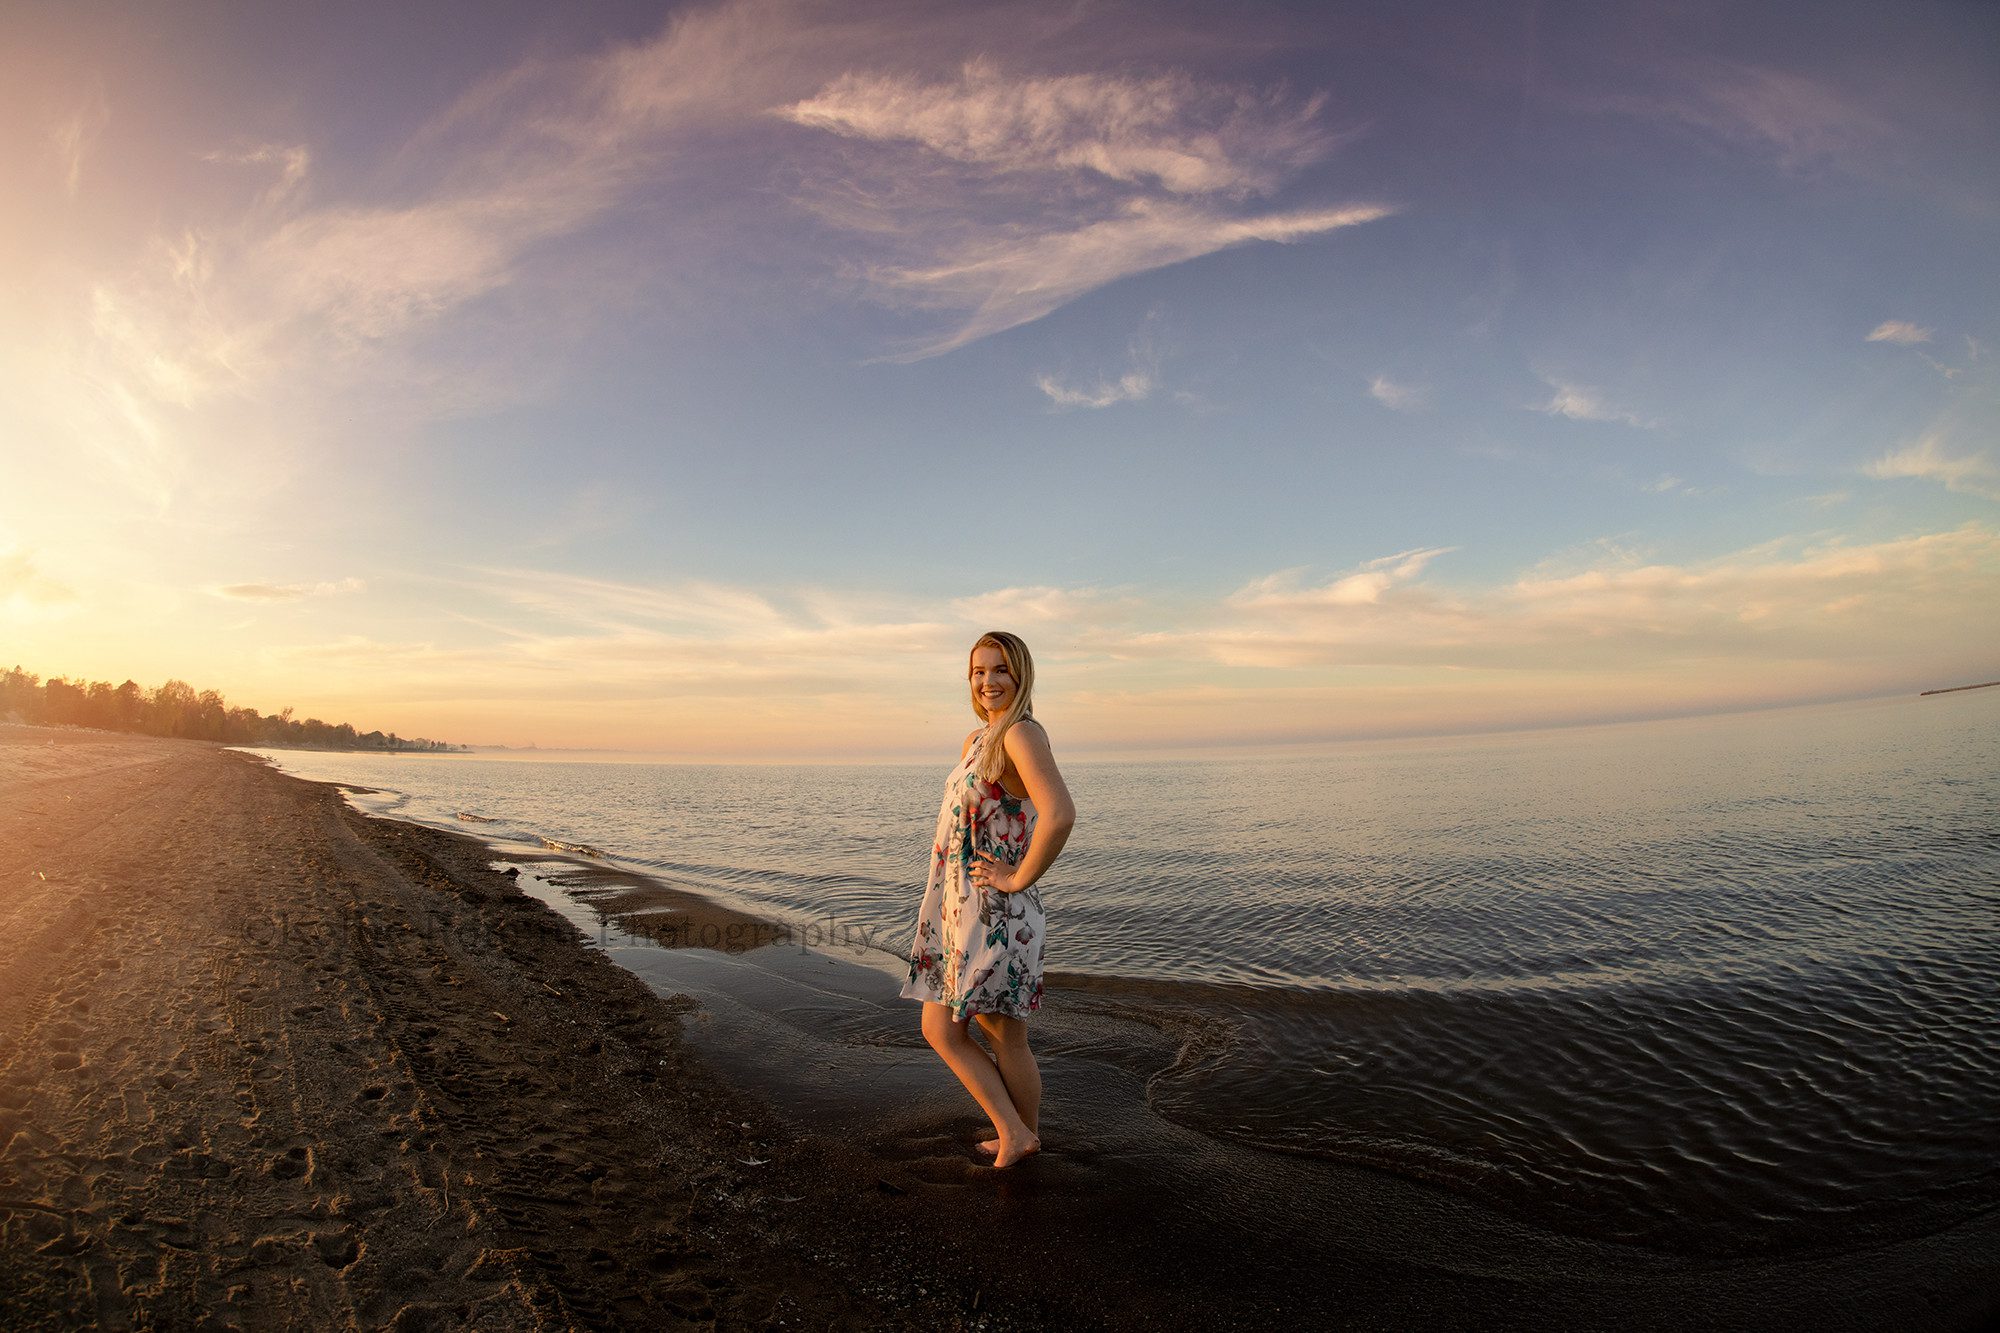 senior beach session a high school senior girl from kenosha Wisconsin is standing on a beach on Lake Michigan she's wearing a dress with flowers and the sky behind her is lit up with pastel colors a photographer from milwaukee is photographing her